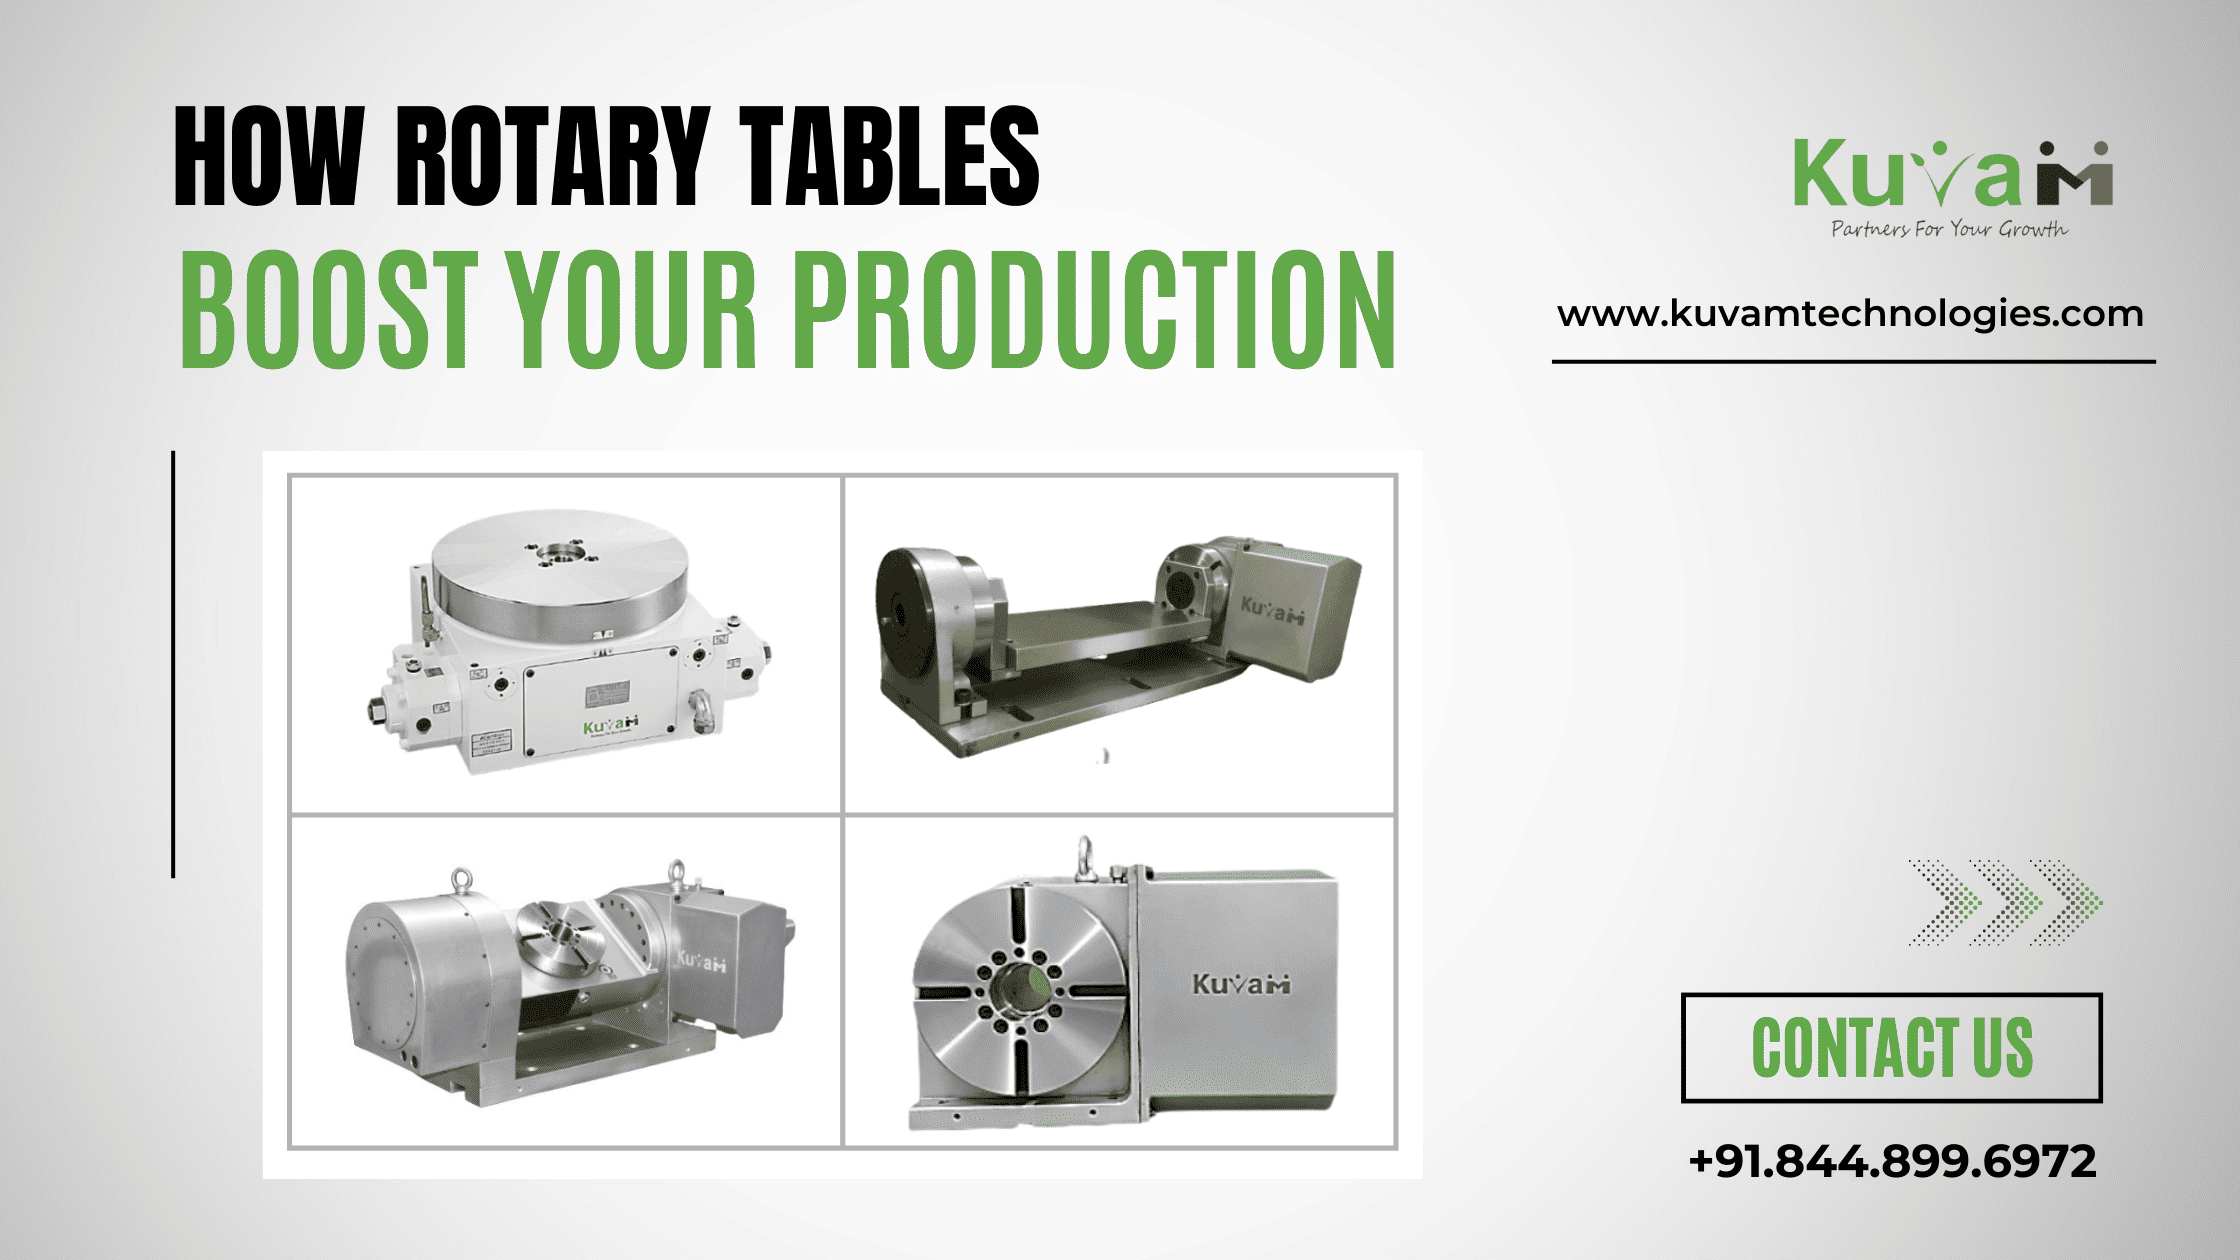 How Rotary Tables Boost Your Production